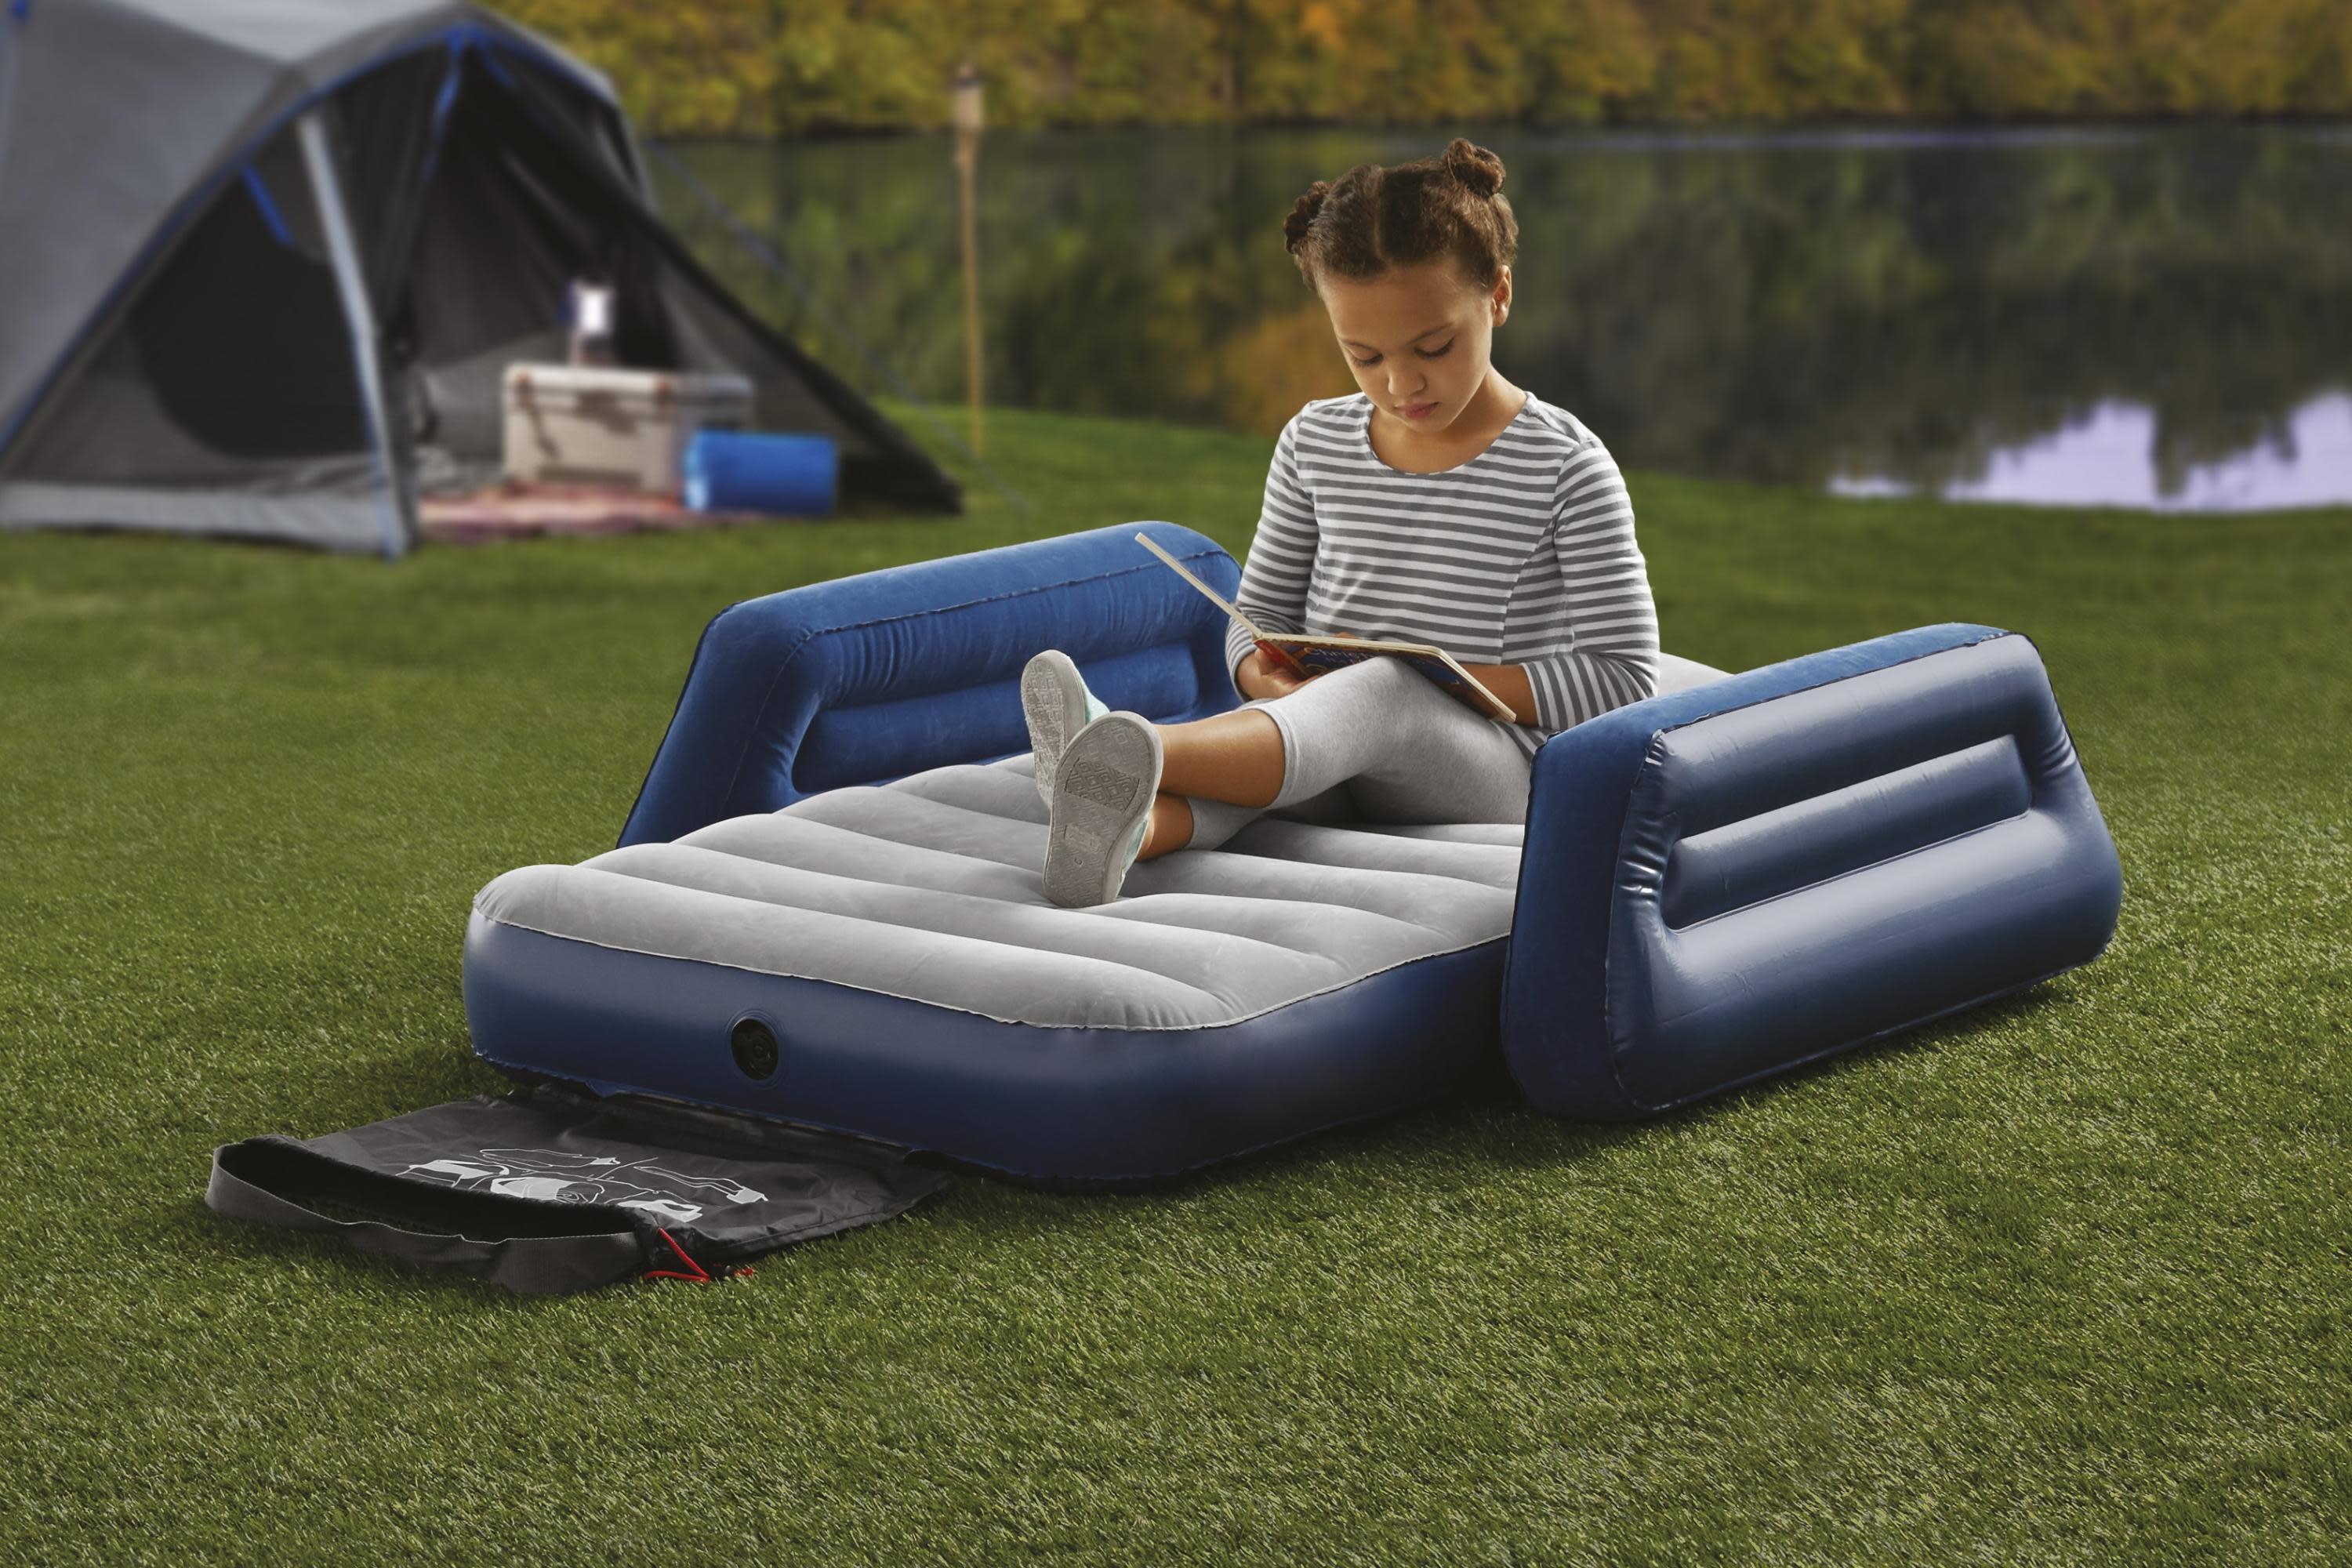 Ozark Trail Kids Camping Airbed with Travel Bag - image 1 of 6